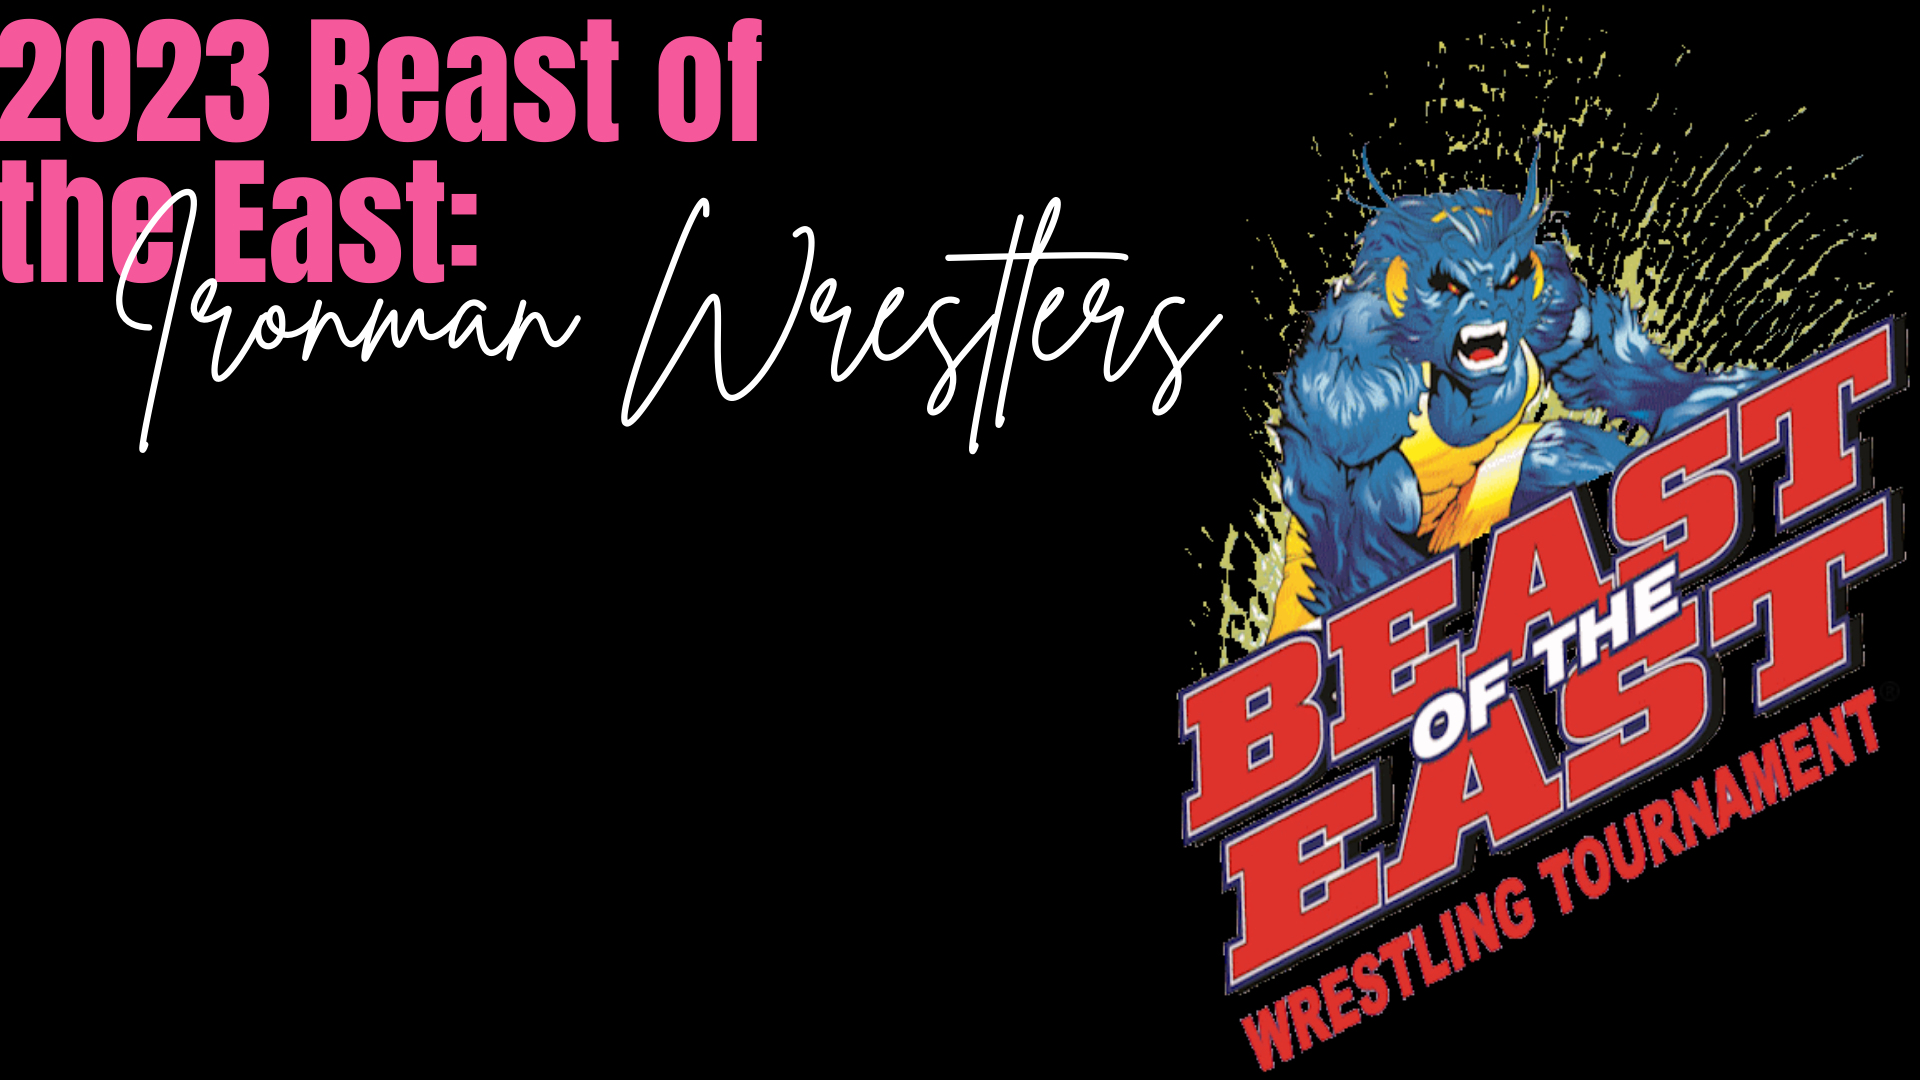 2023 Beast of the East Preview Ironman Teams & Wrestlers TKDWN Media